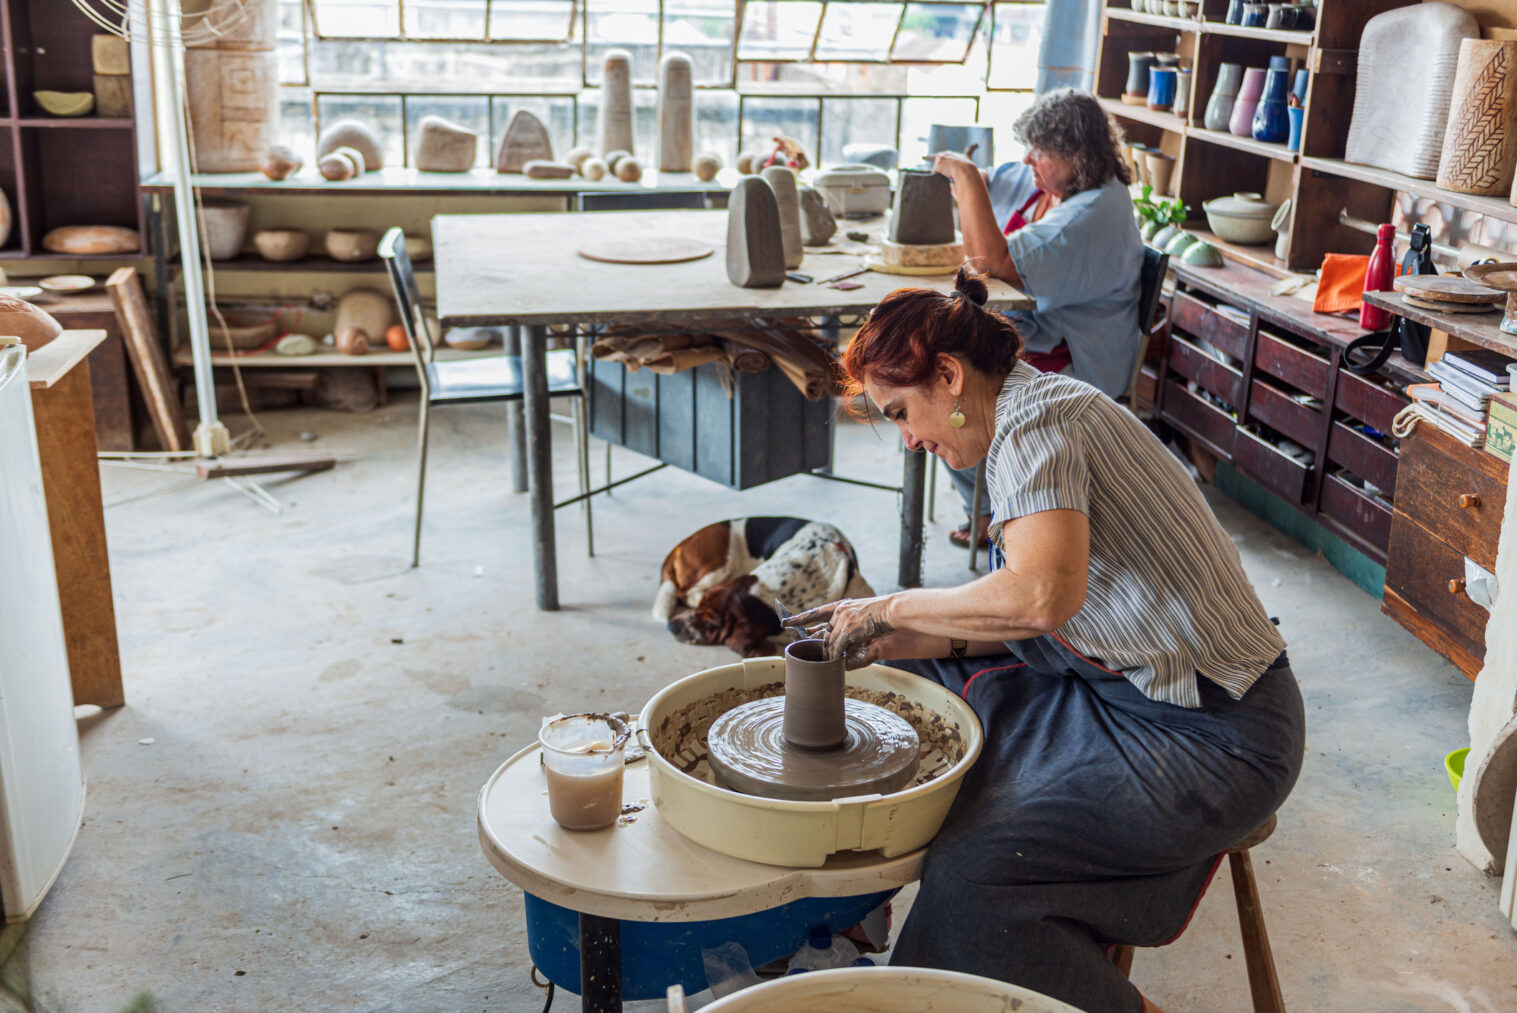 Older woman creating ceramic art with a pottery wheel. Another older woman is sculpting on a table in the back.